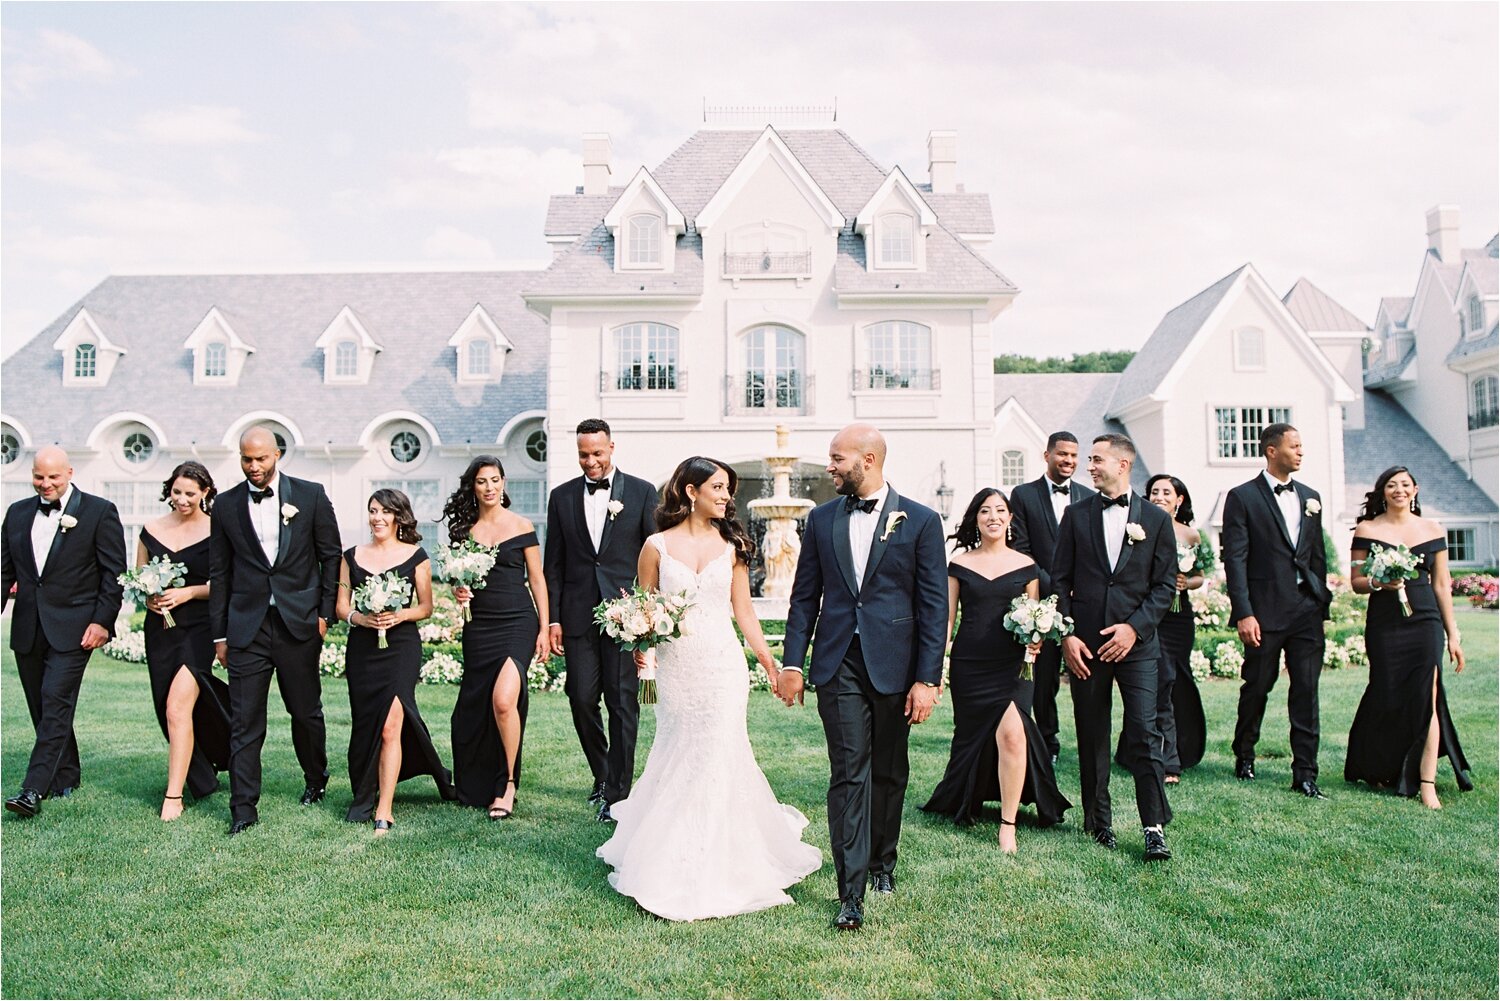 Bridal Party Walking on the front lawn at The Park Chateau